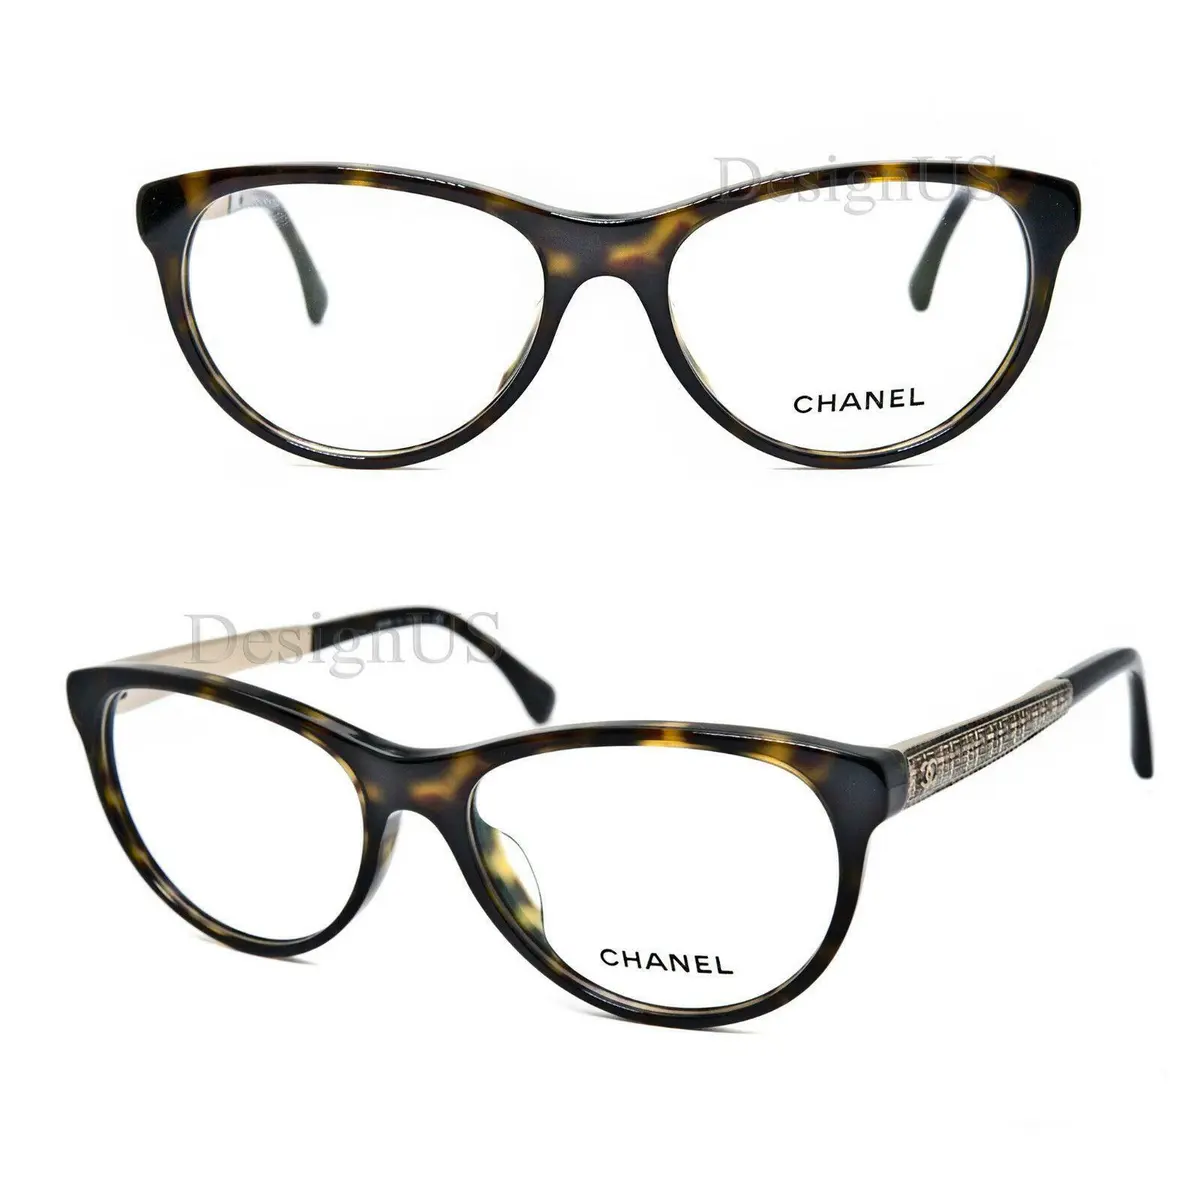 Brand New Chanel Women Eyeglasses CH 3333 c.714 Rx Authentic Italy